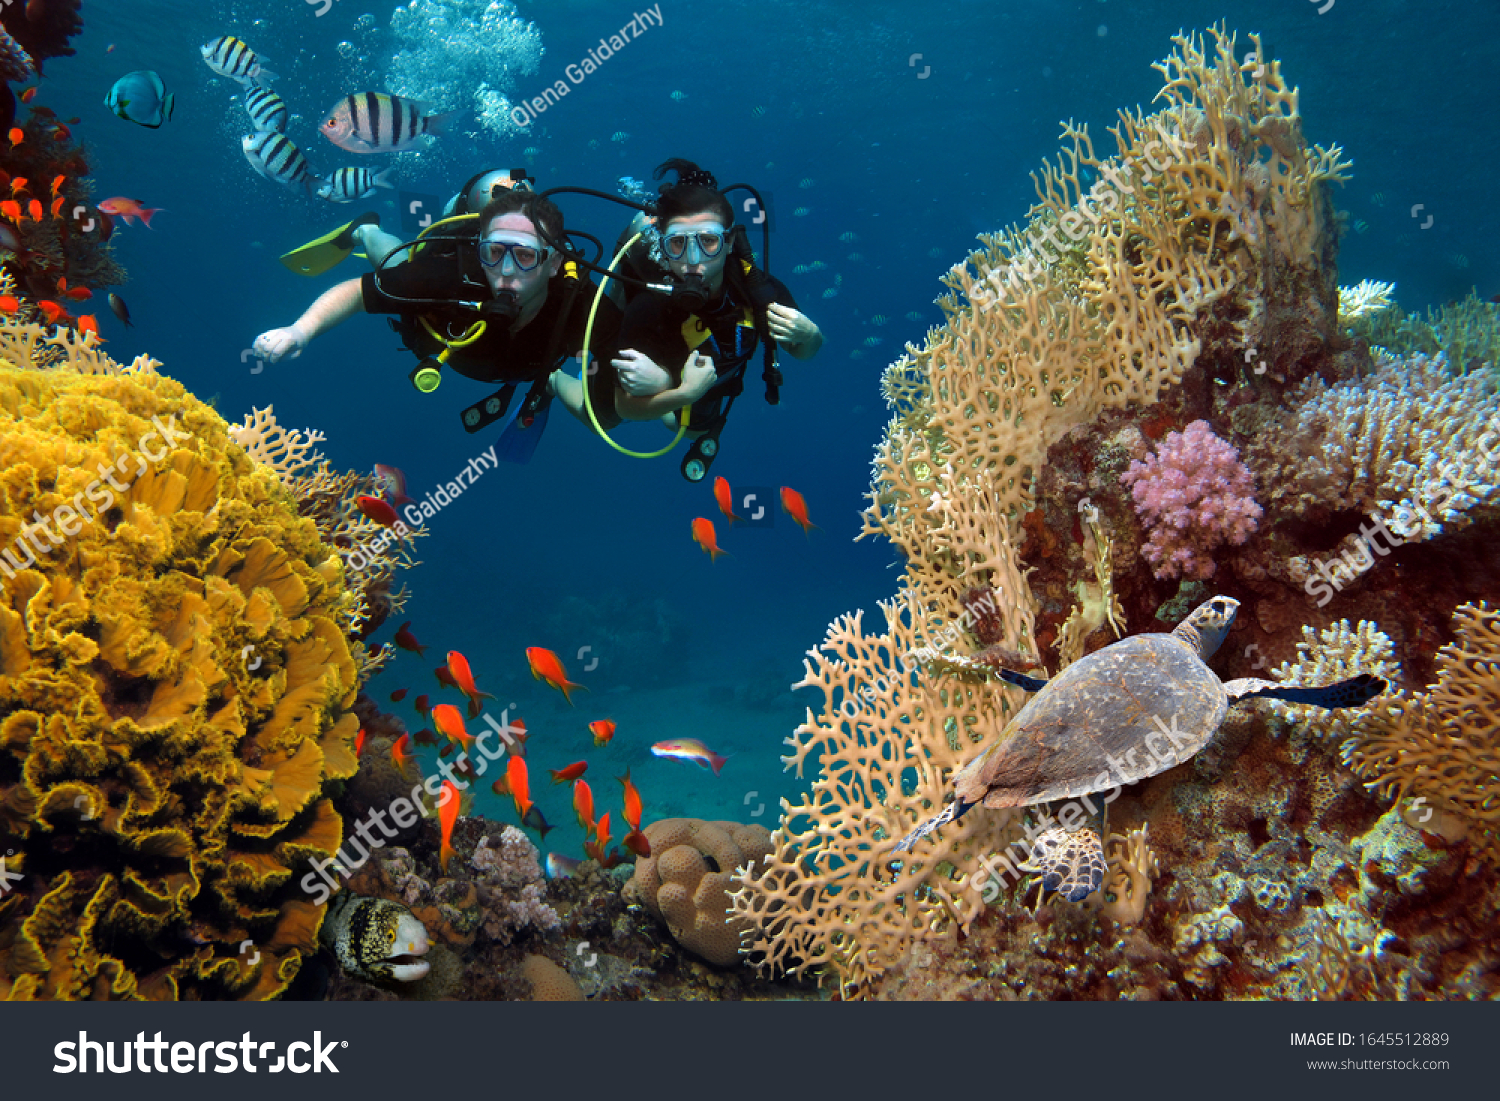 The loving couple dives among corals and fishes in the ocean #1645512889